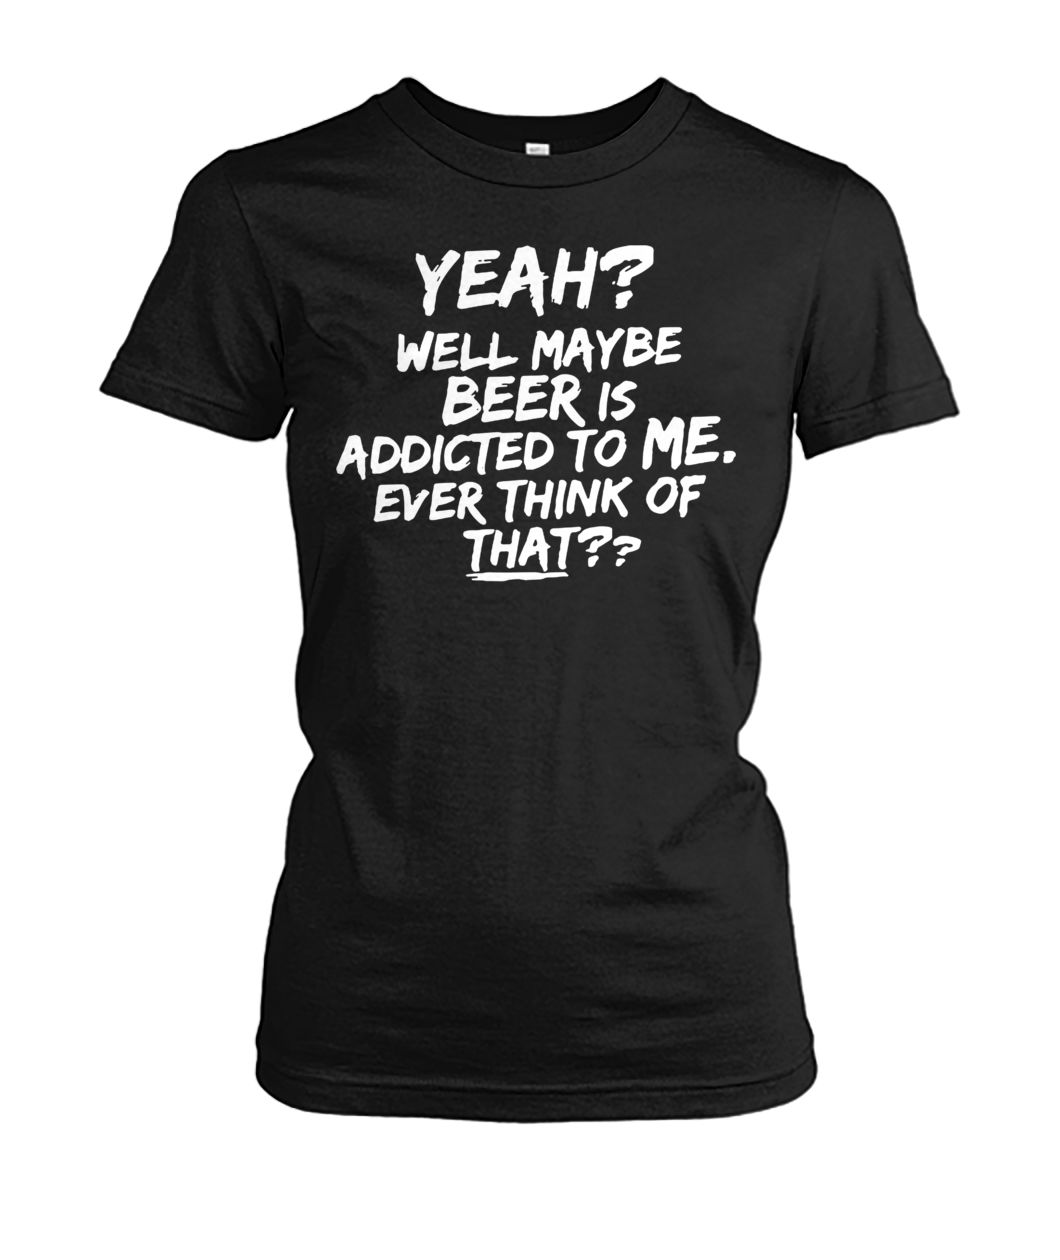 Yeah well maybe beer is addicted to me ever think of that women's crew tee